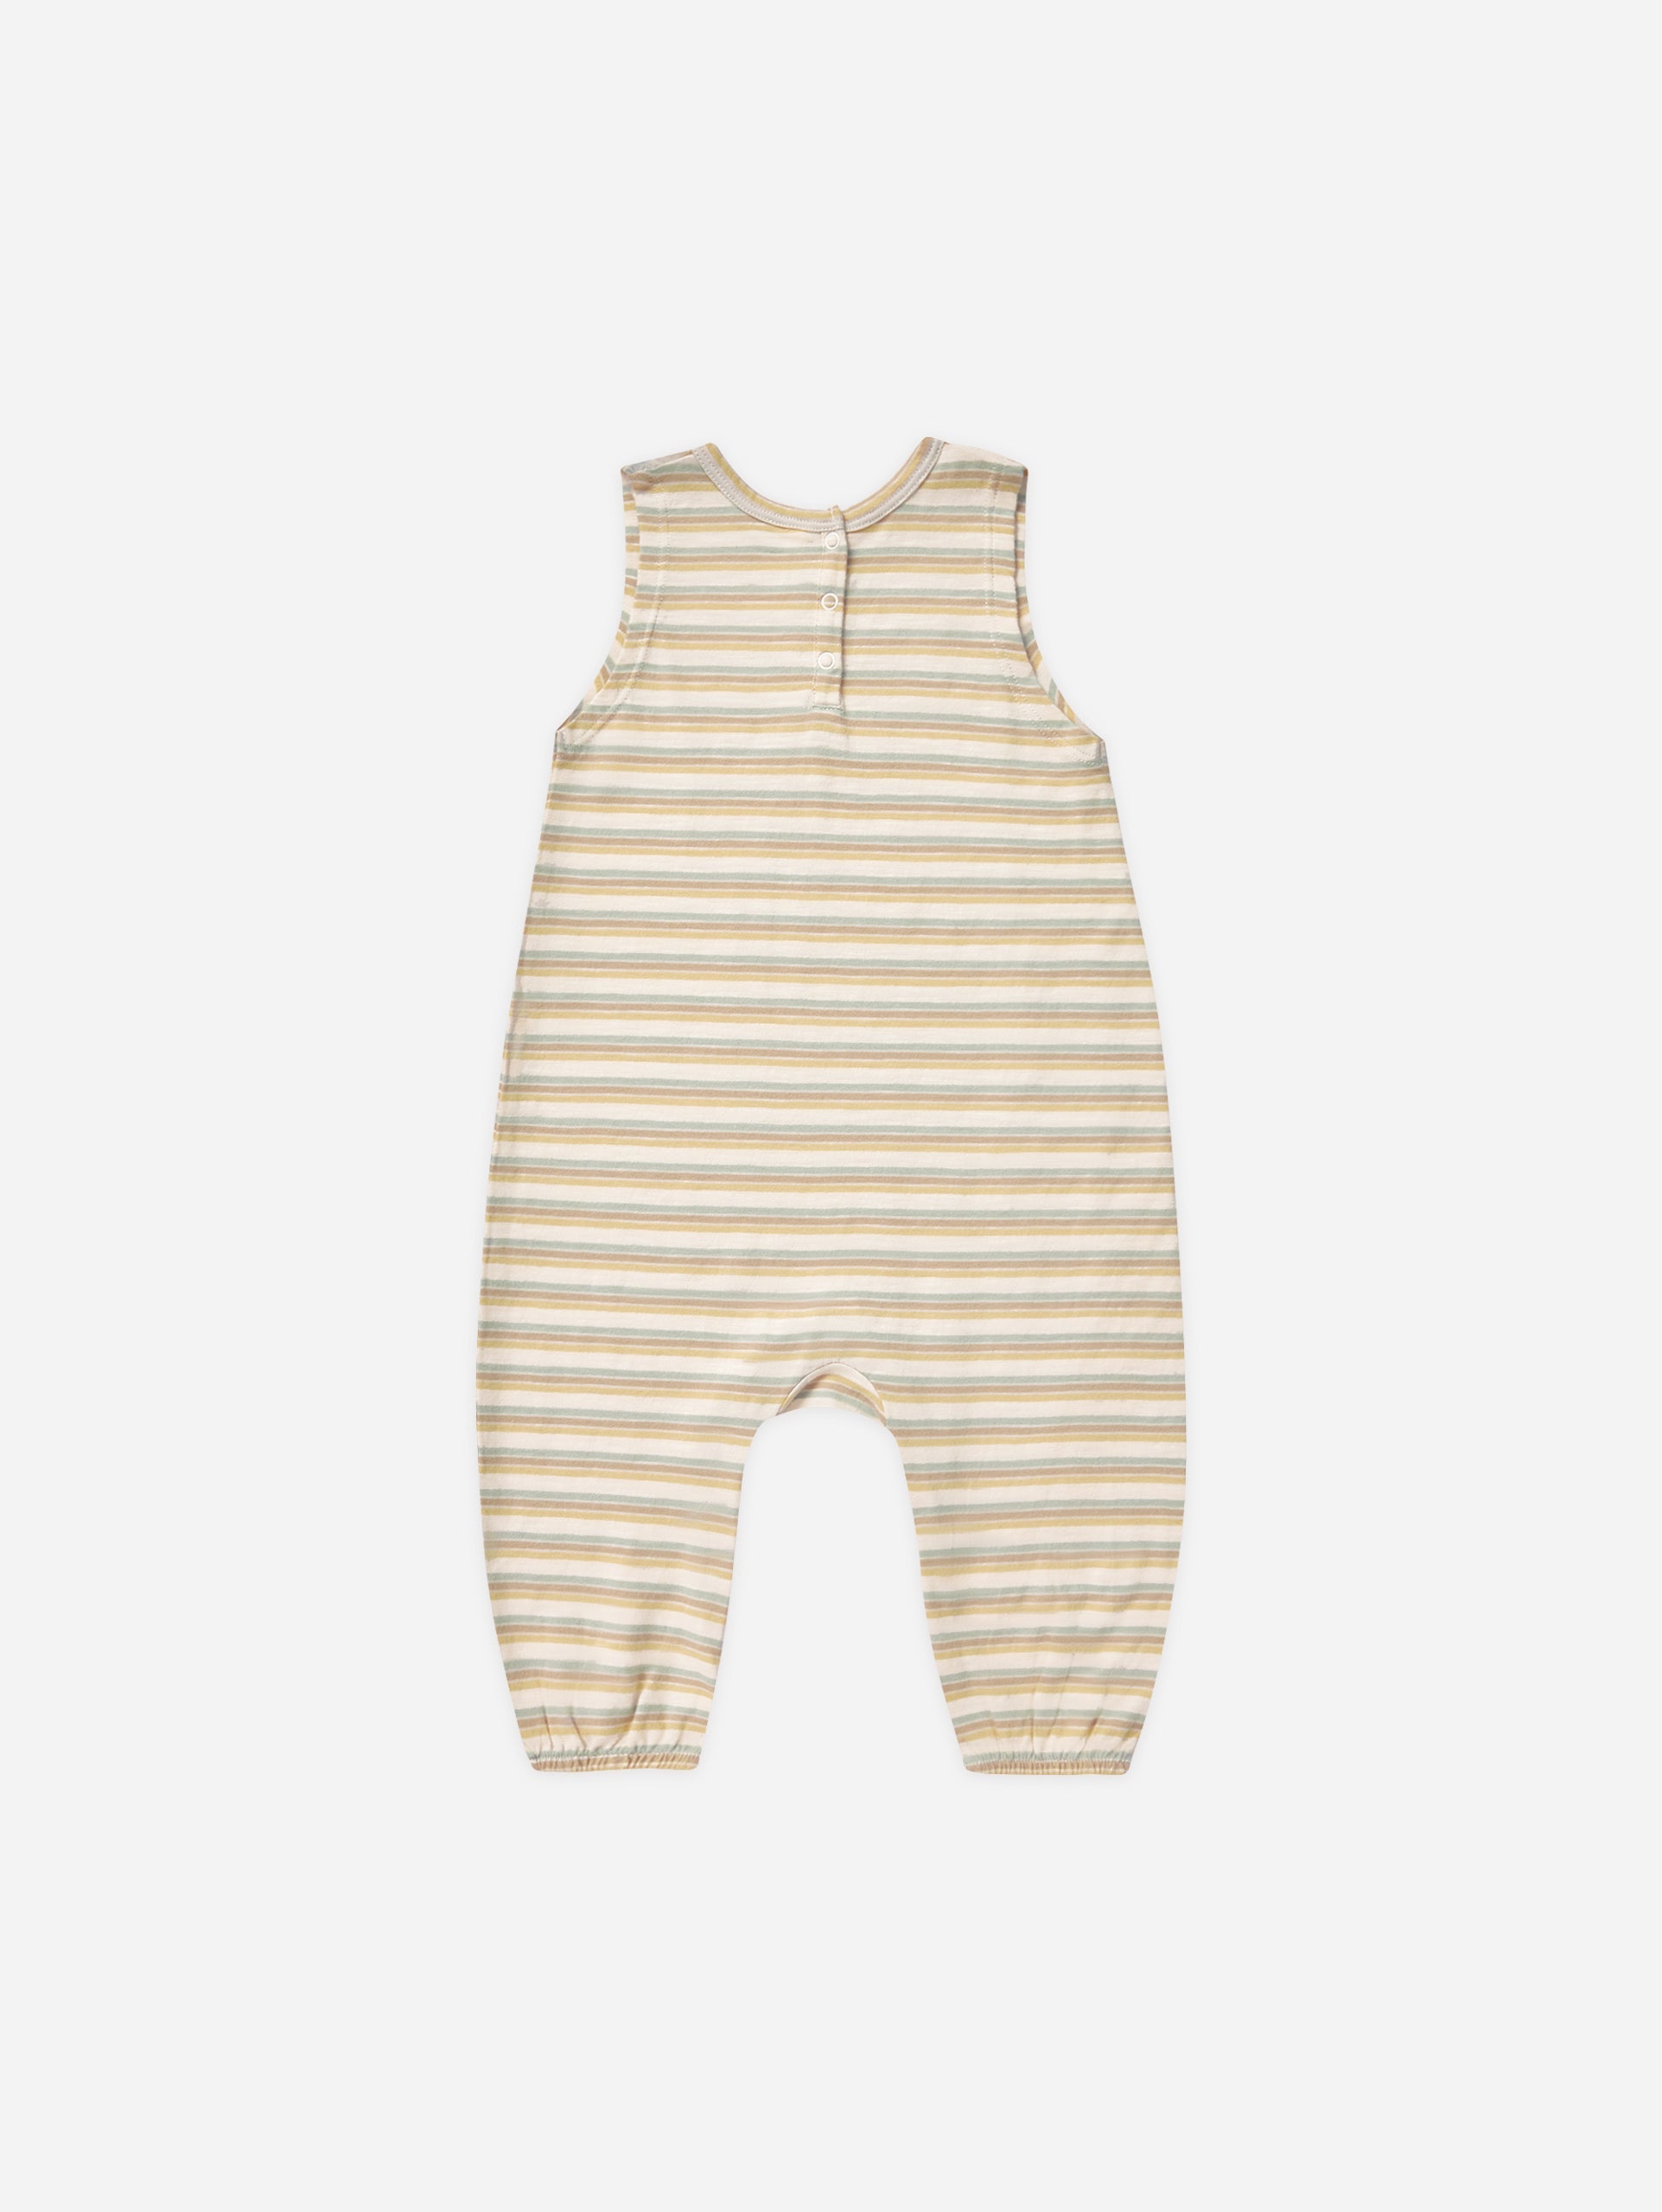 Mills Jumpsuit || Vintage Stripe - Rylee + Cru | Kids Clothes | Trendy Baby Clothes | Modern Infant Outfits |